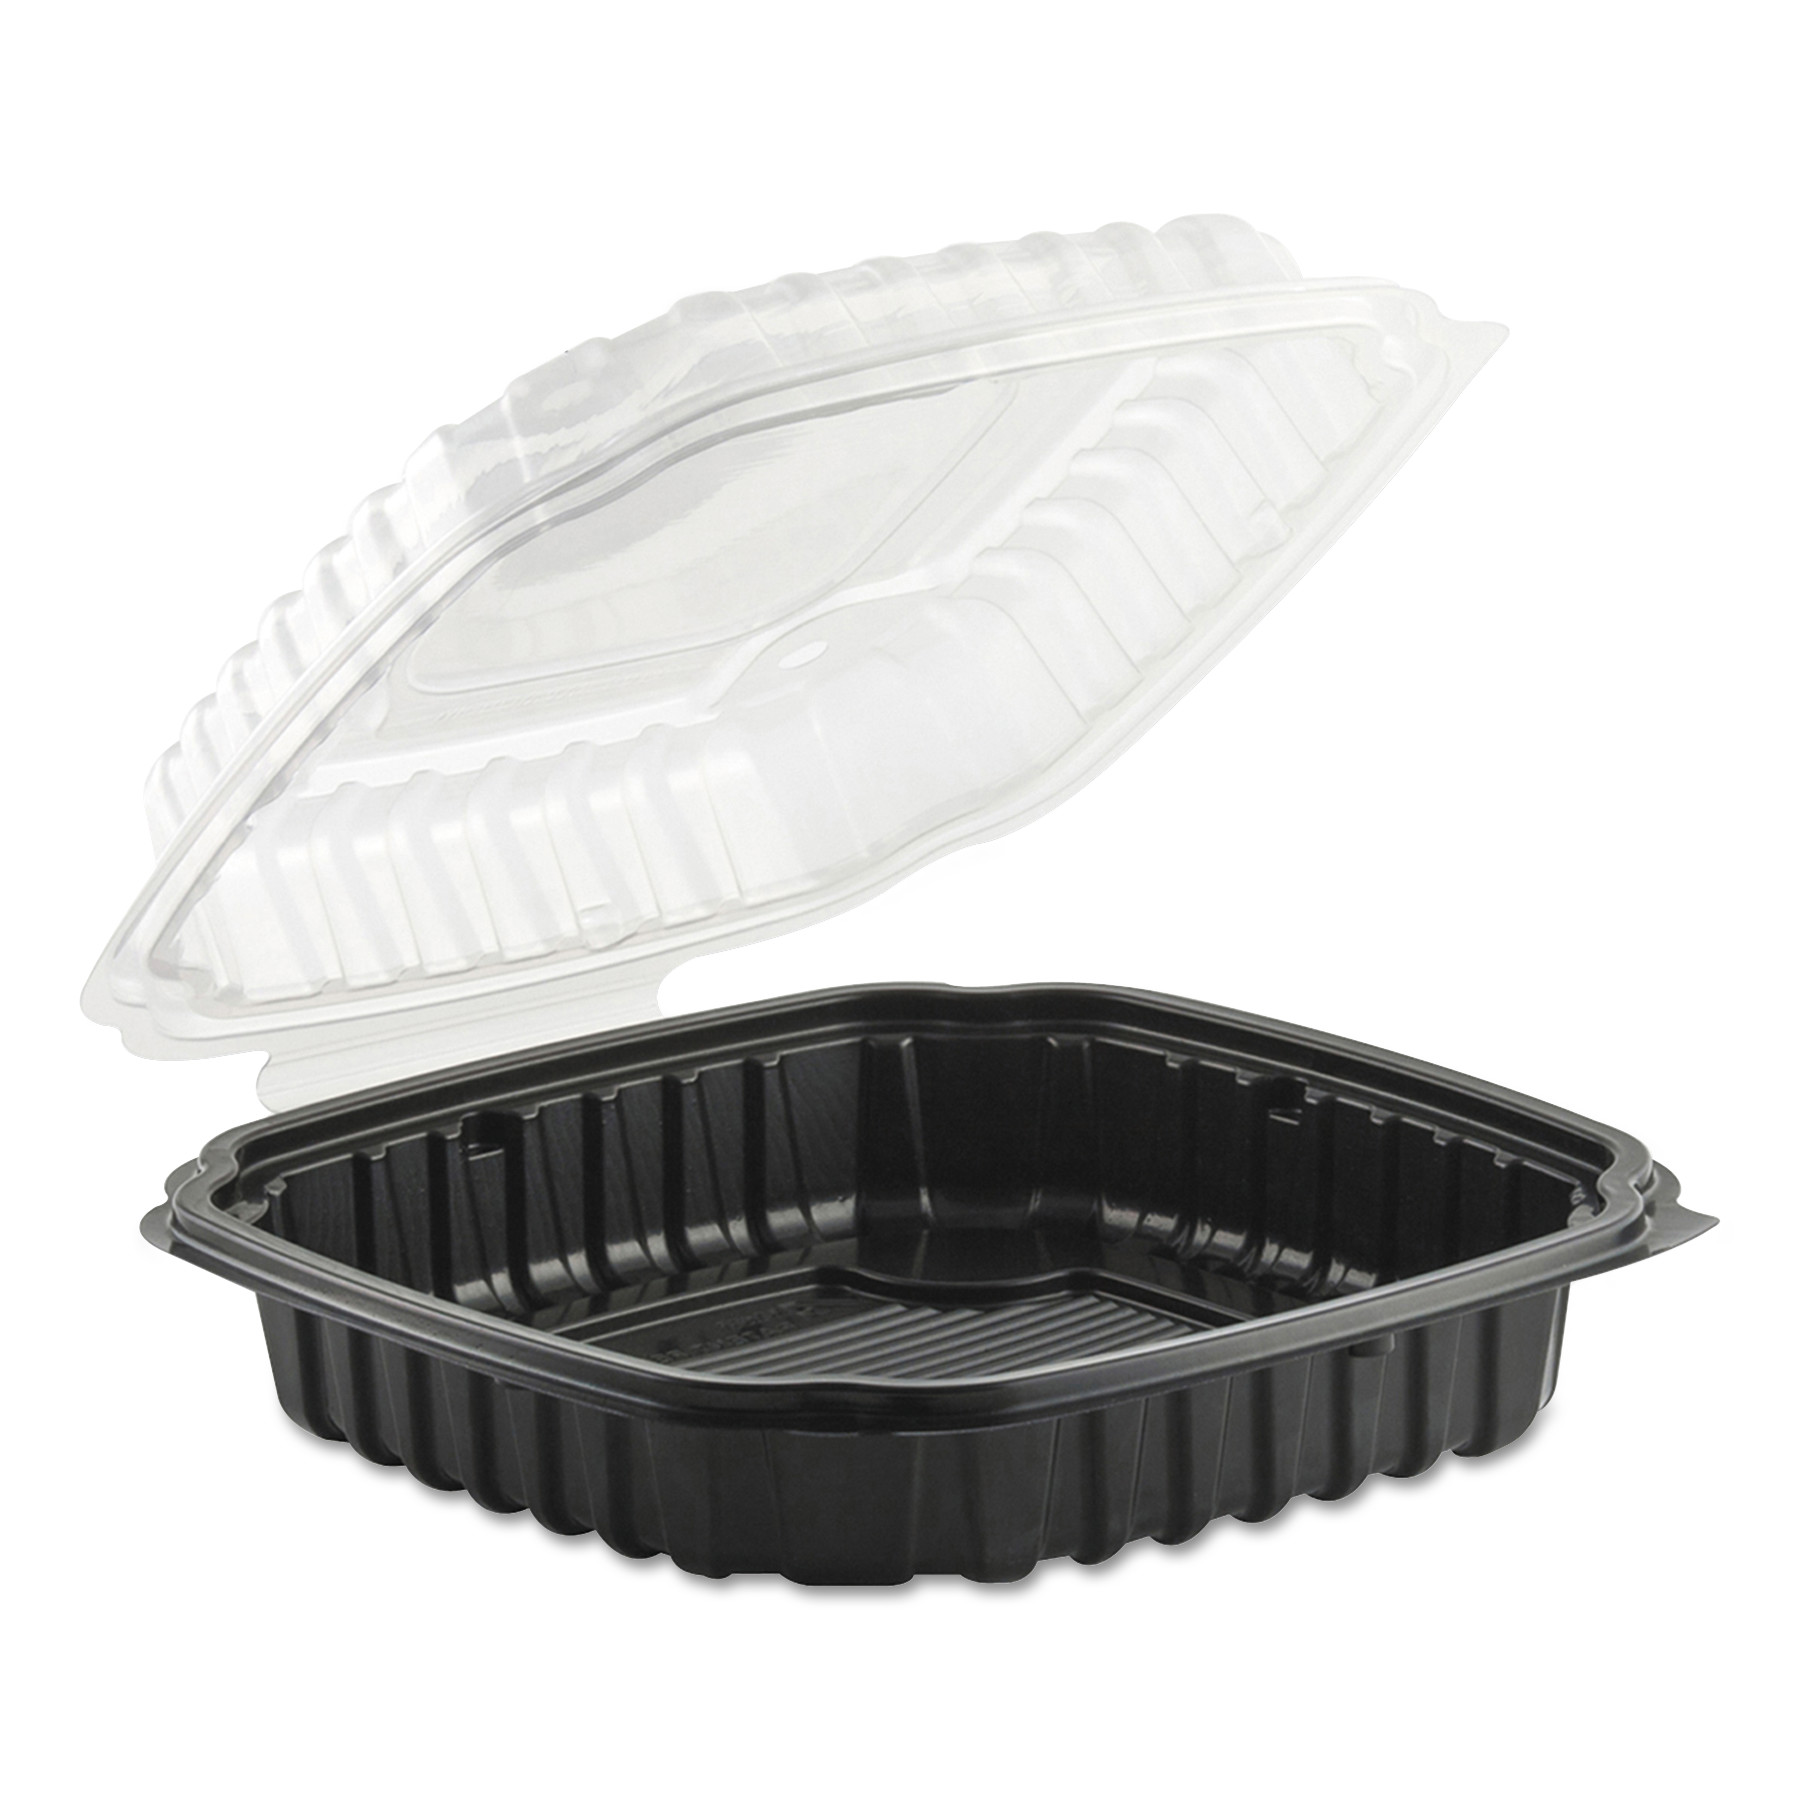  Anchor Packaging 4669111 Culinary Basics Microwavable Container, 46.5 oz, 10.5 x 9.5 x 2.5, Clear/Black, 100/Carton (ANZ4669111) 